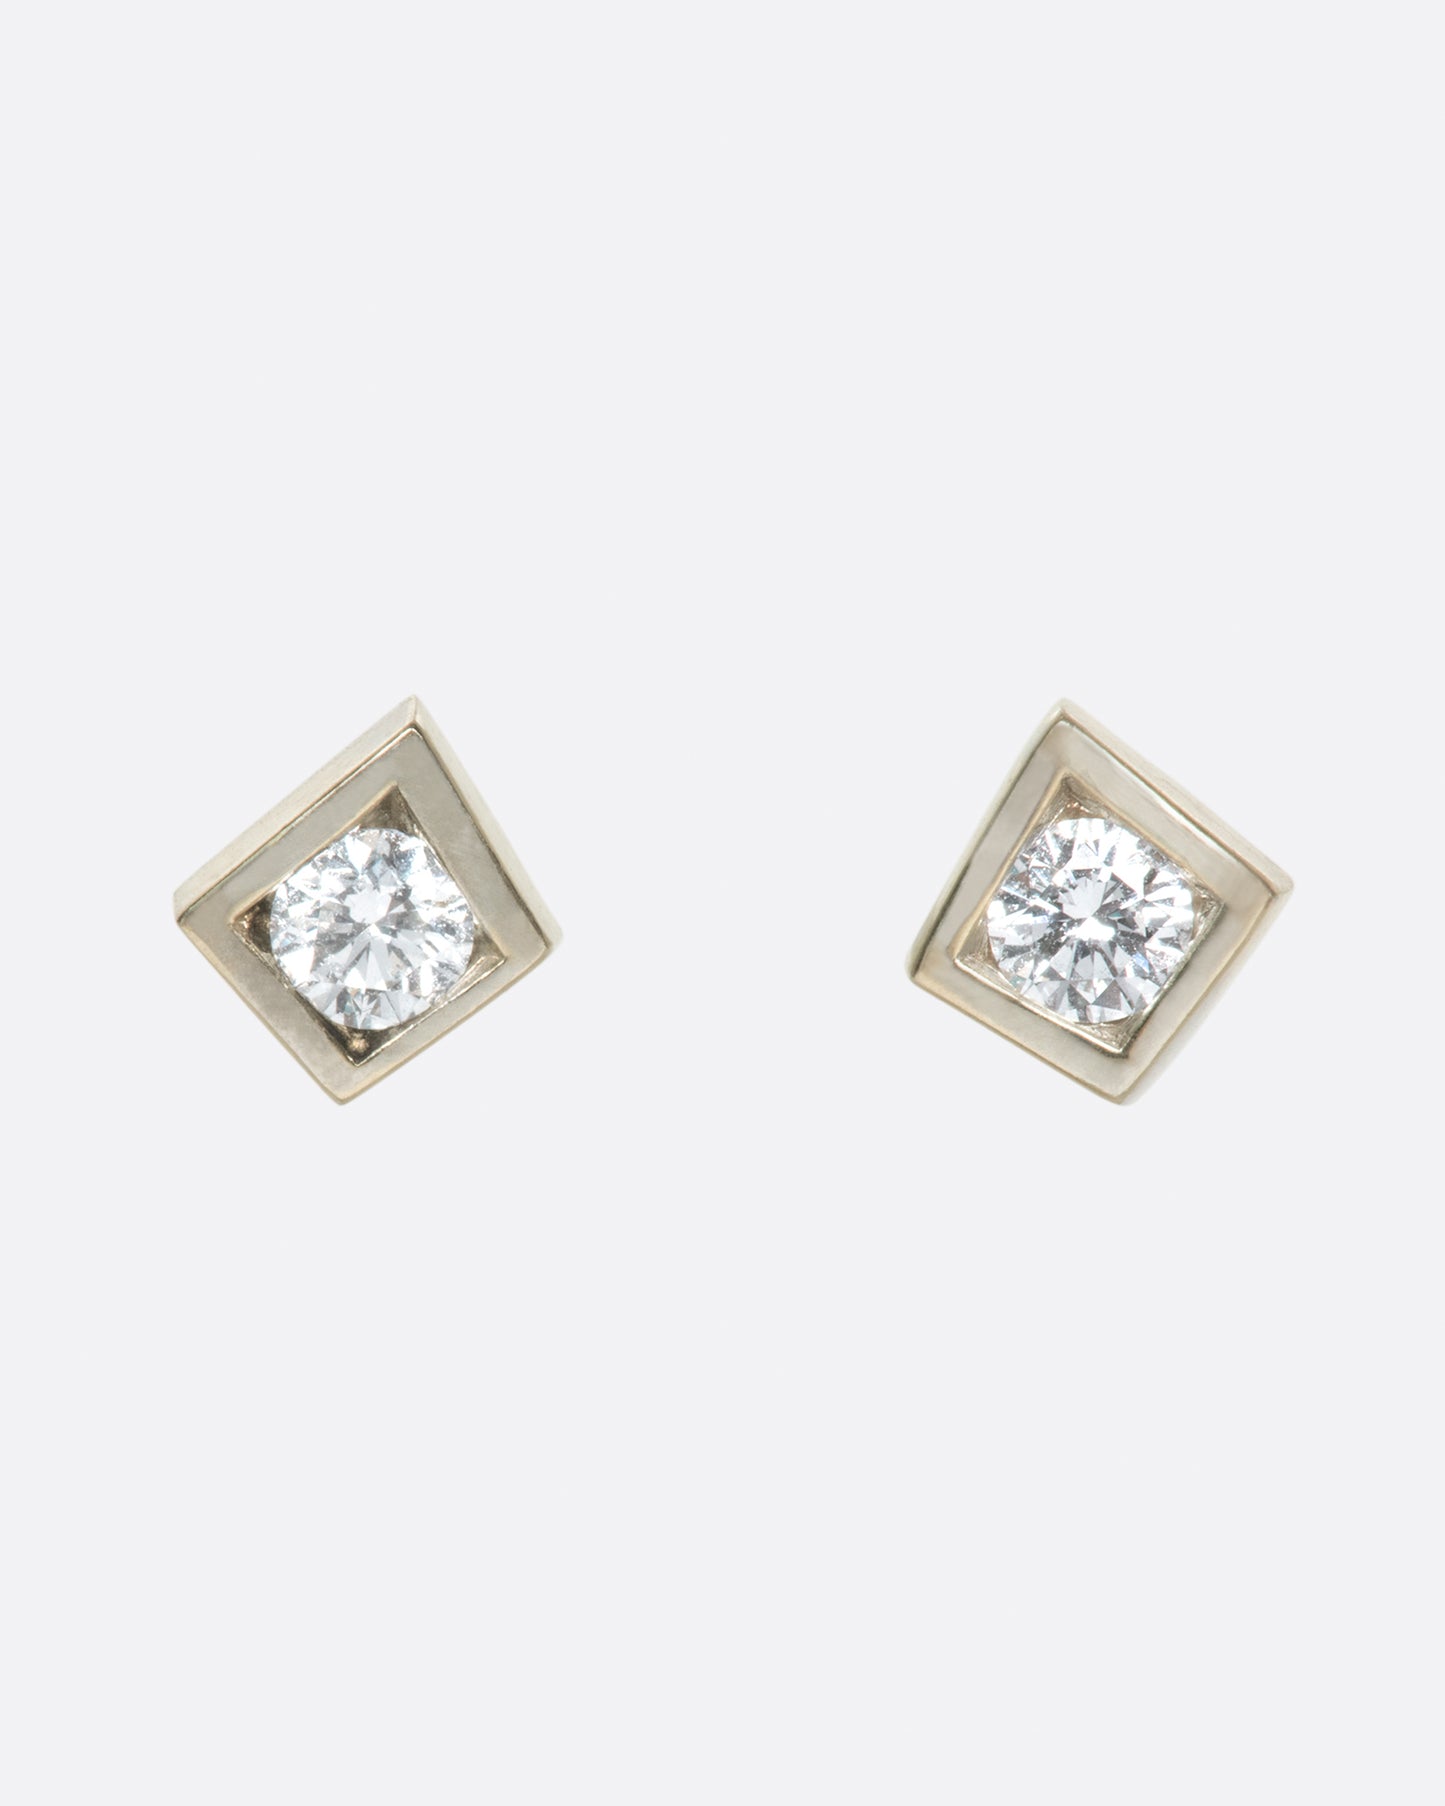 A pair of round diamond solitaire earrings with square tension settings.